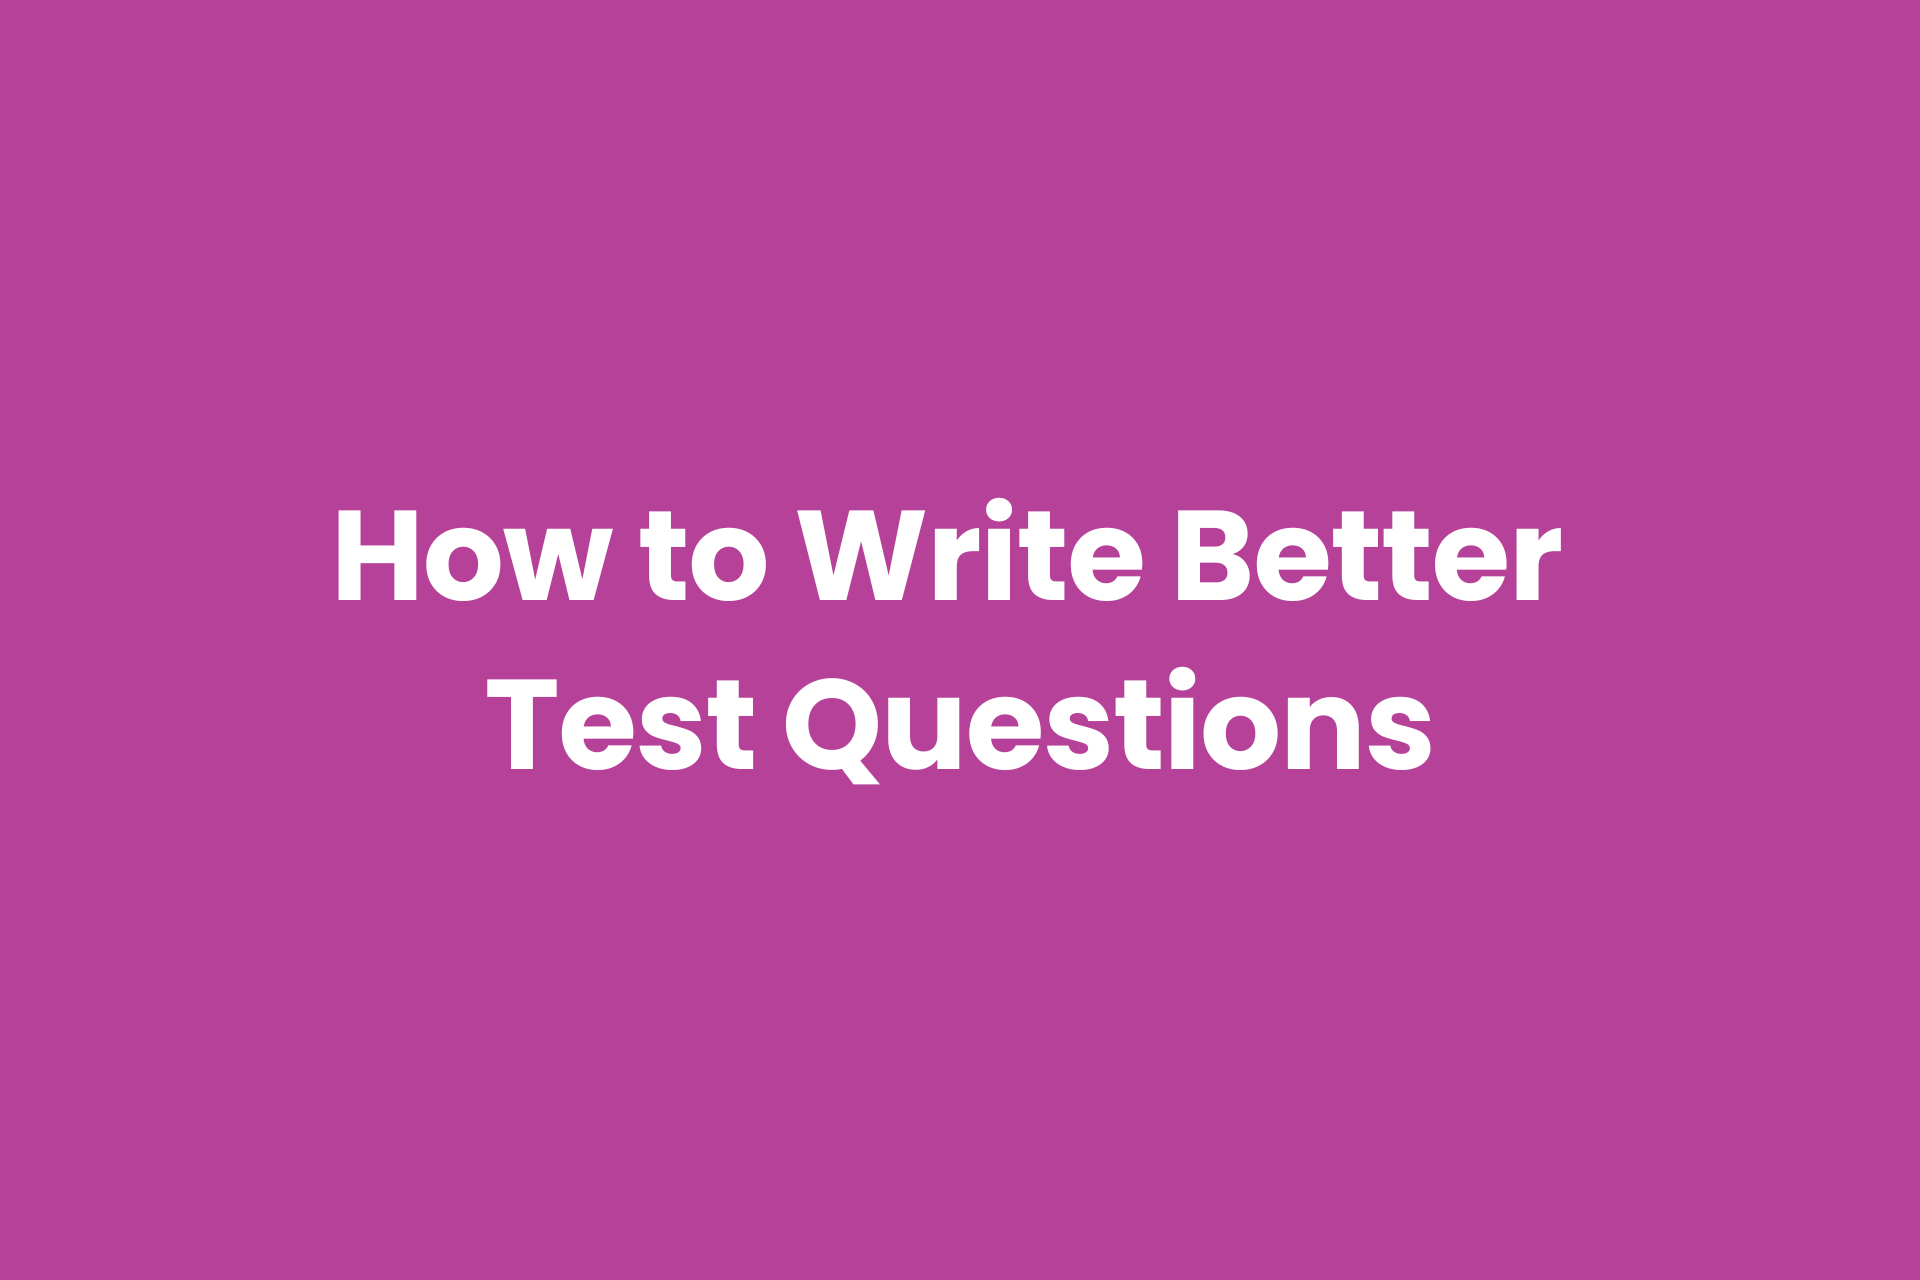 Article to help instructors write better exam questions